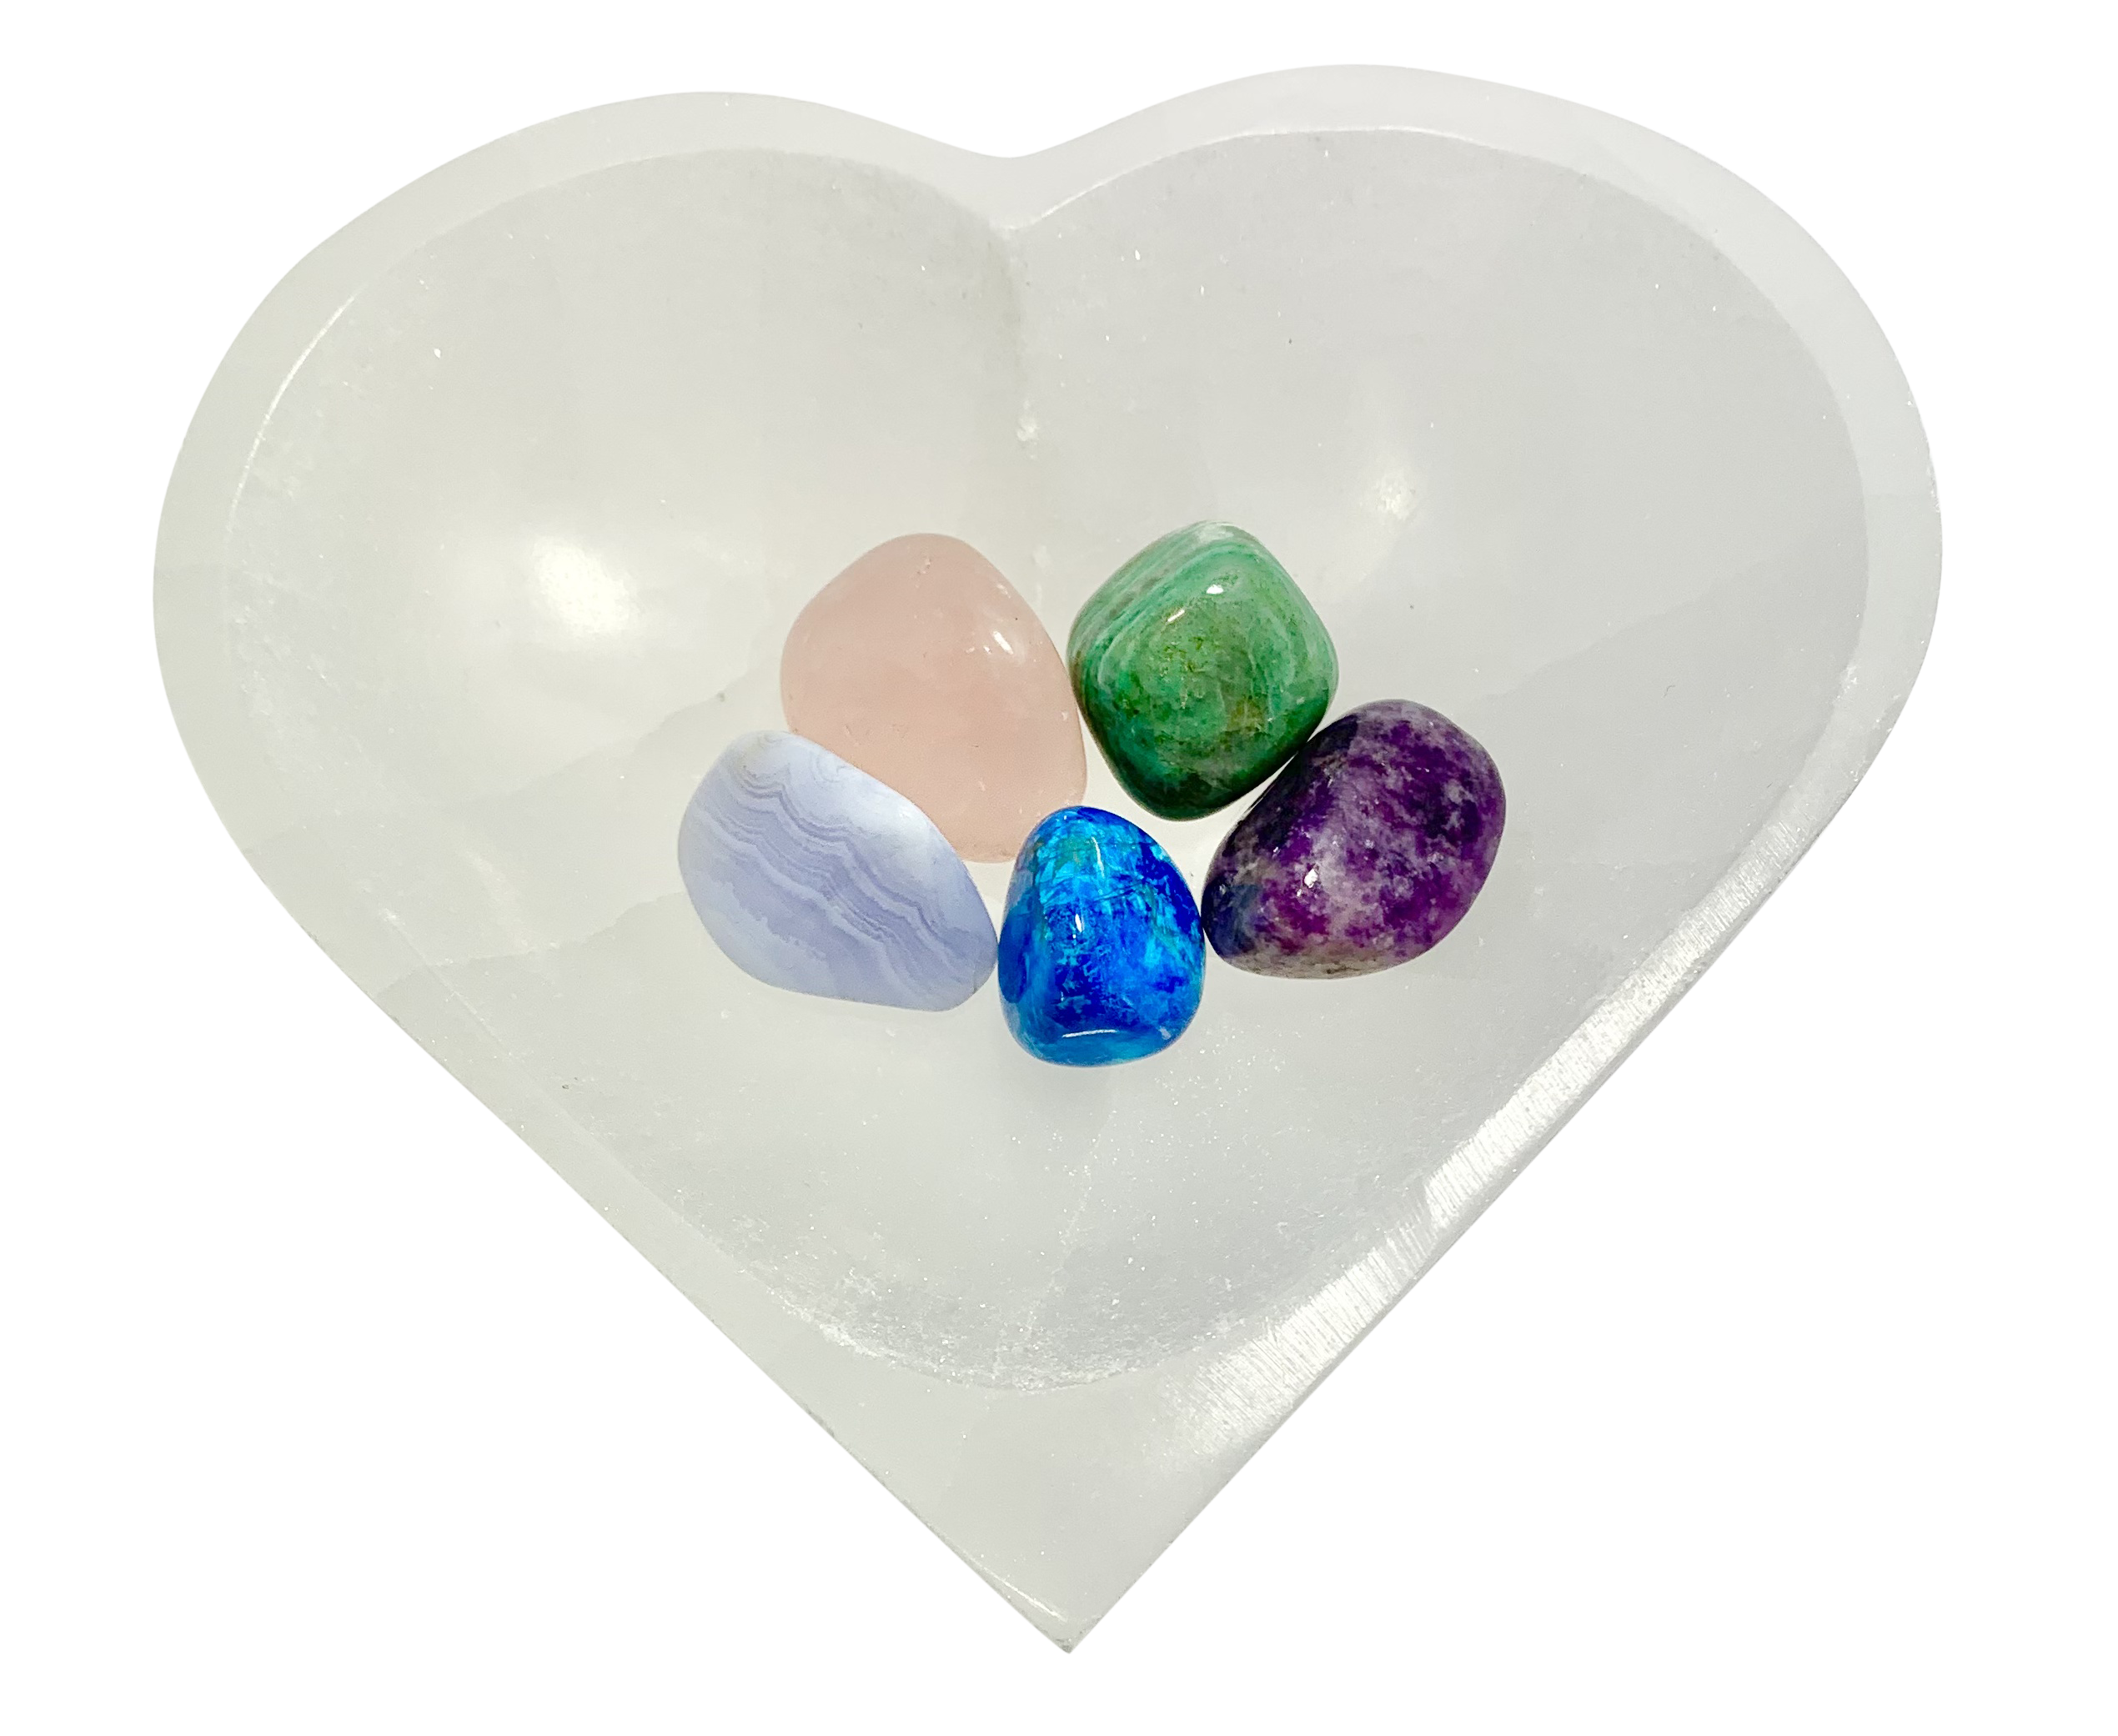 Calming & Soothing Crystal Tumbled Gift Set